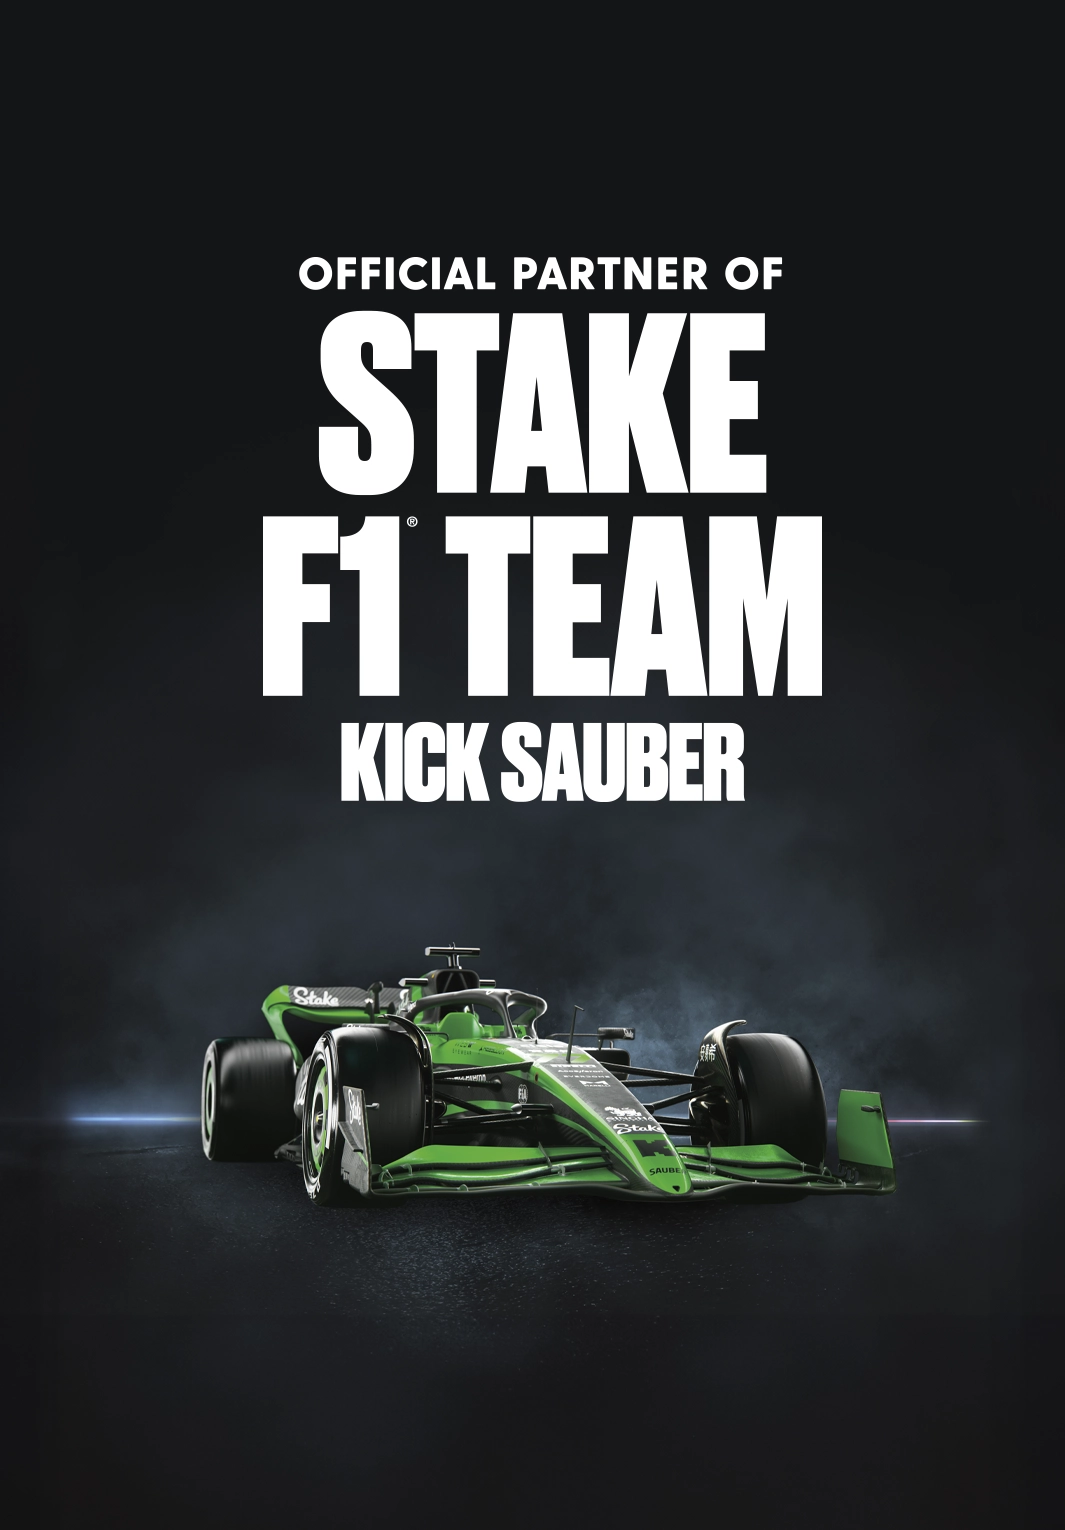 Sunoco is an official sponsor of stake f1 team kick sauber